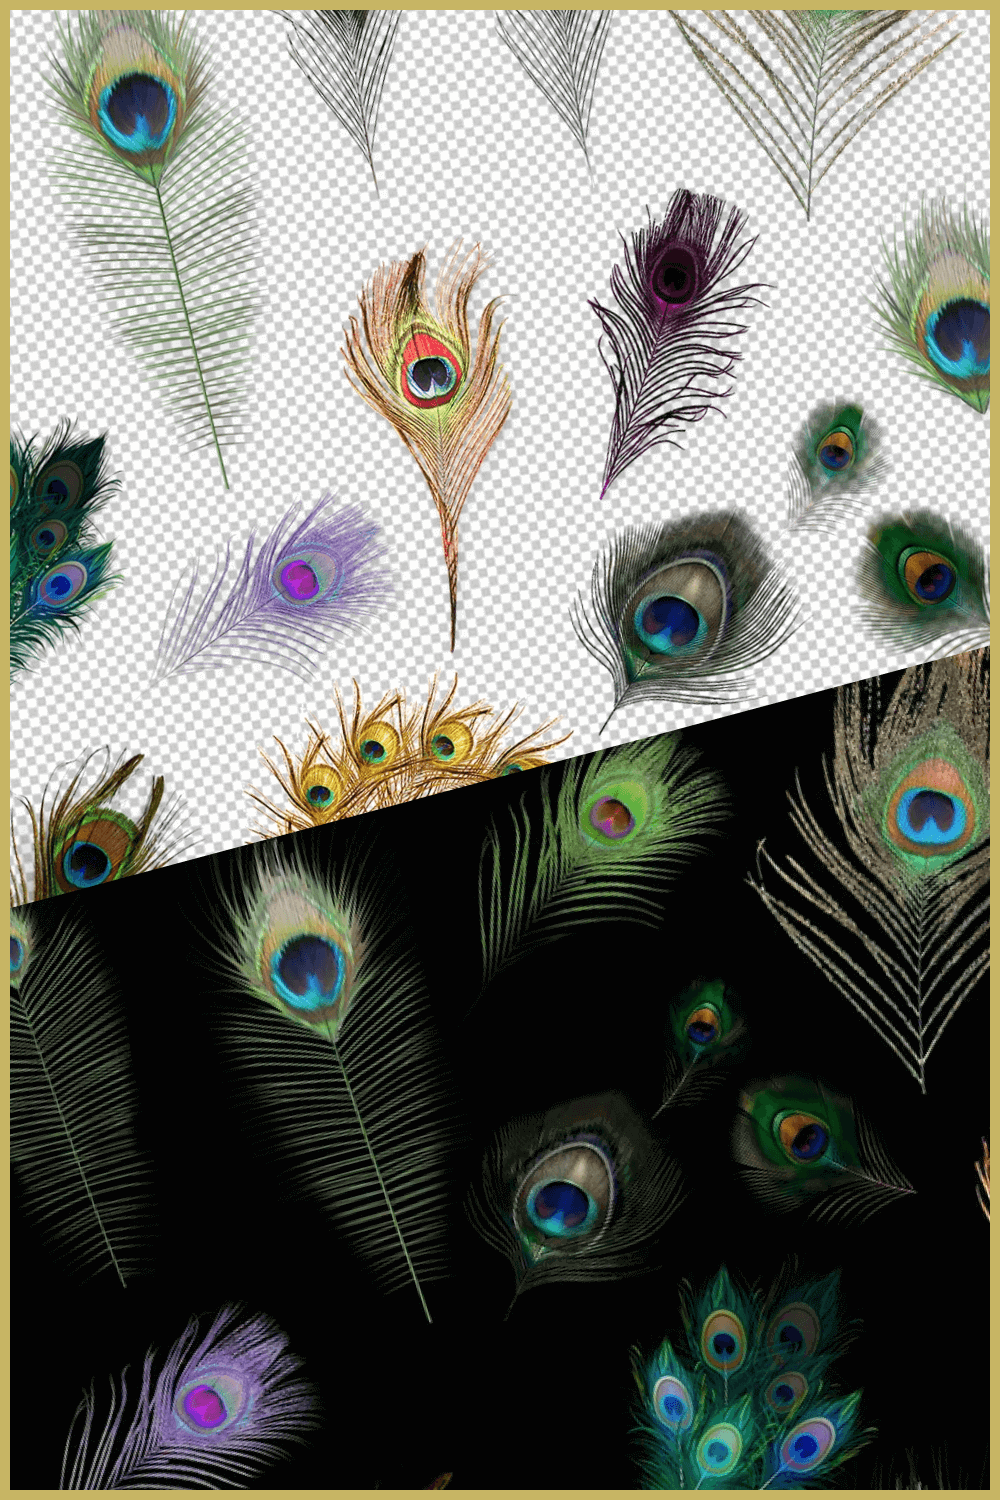 Group of different colored feathers on a black and white background.